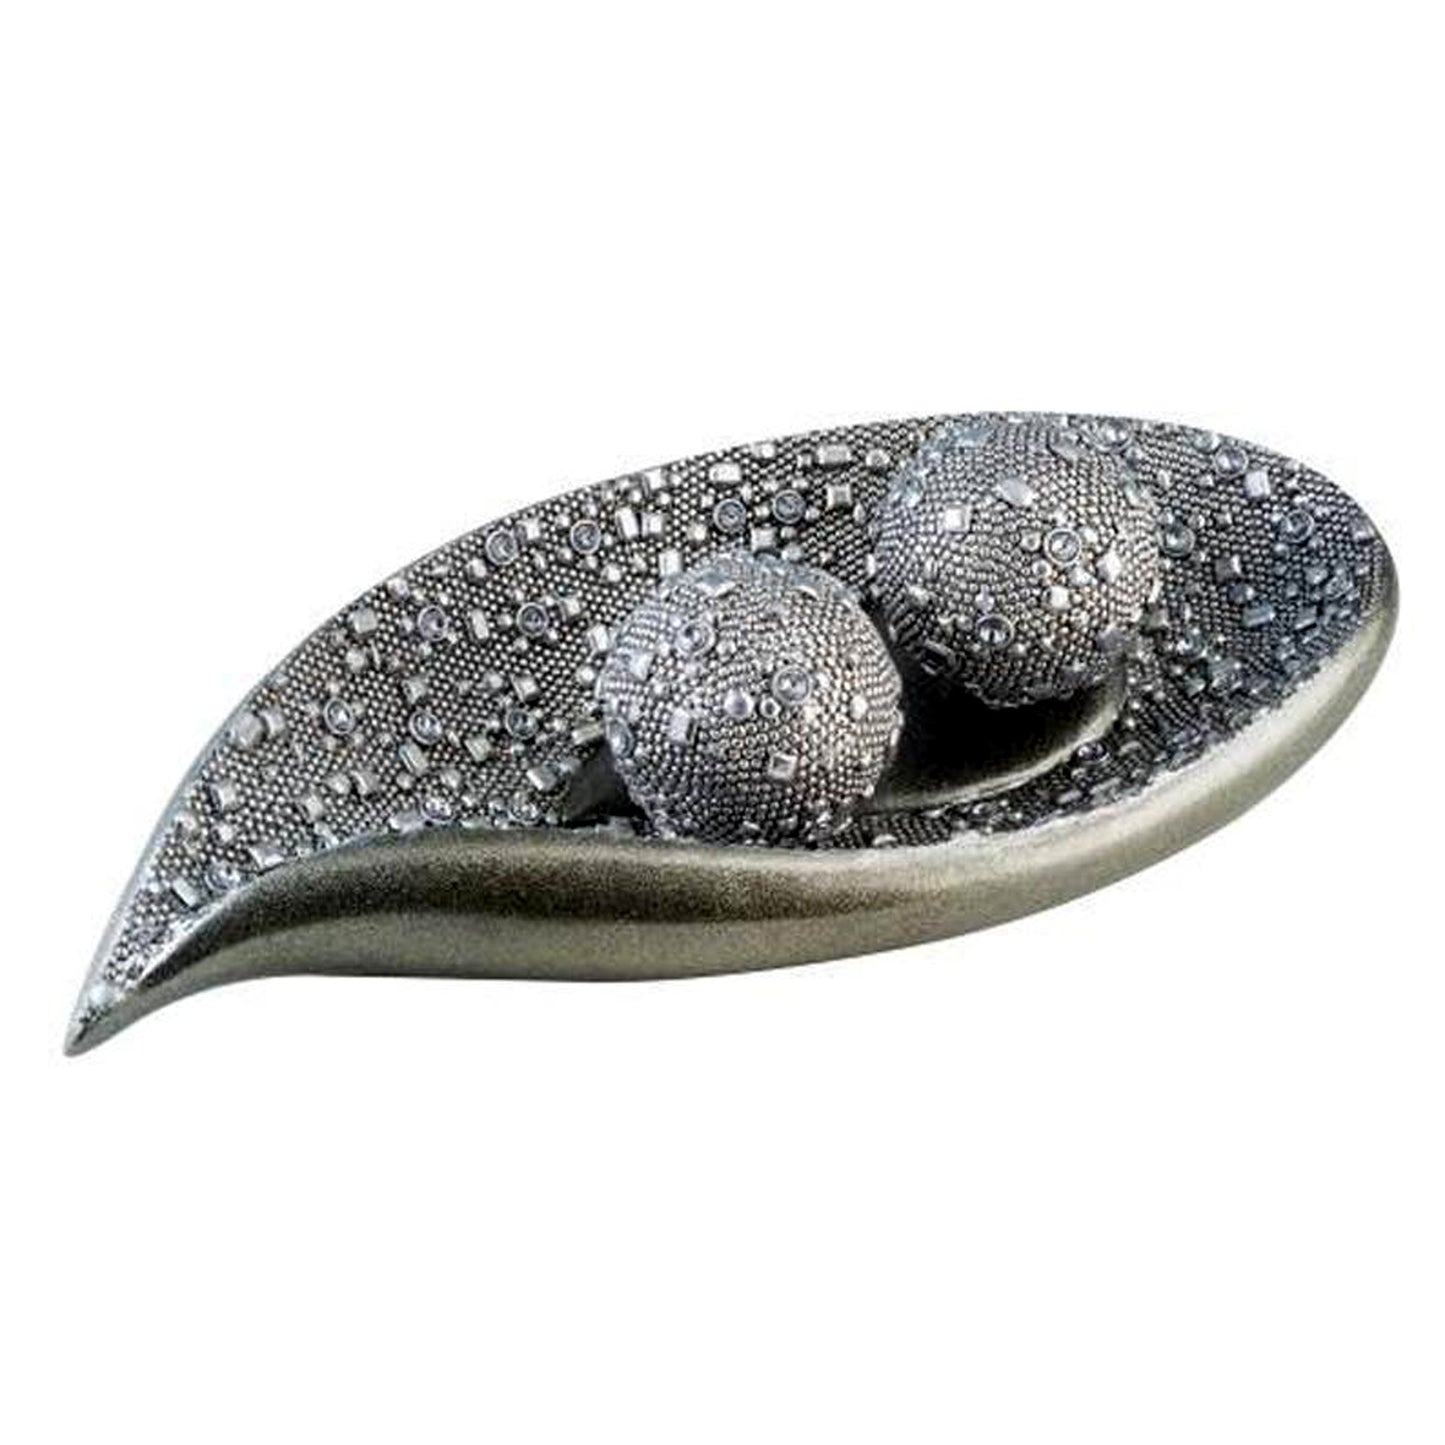 6" Silver Long Polyresin Decorative Bowl With Orbs